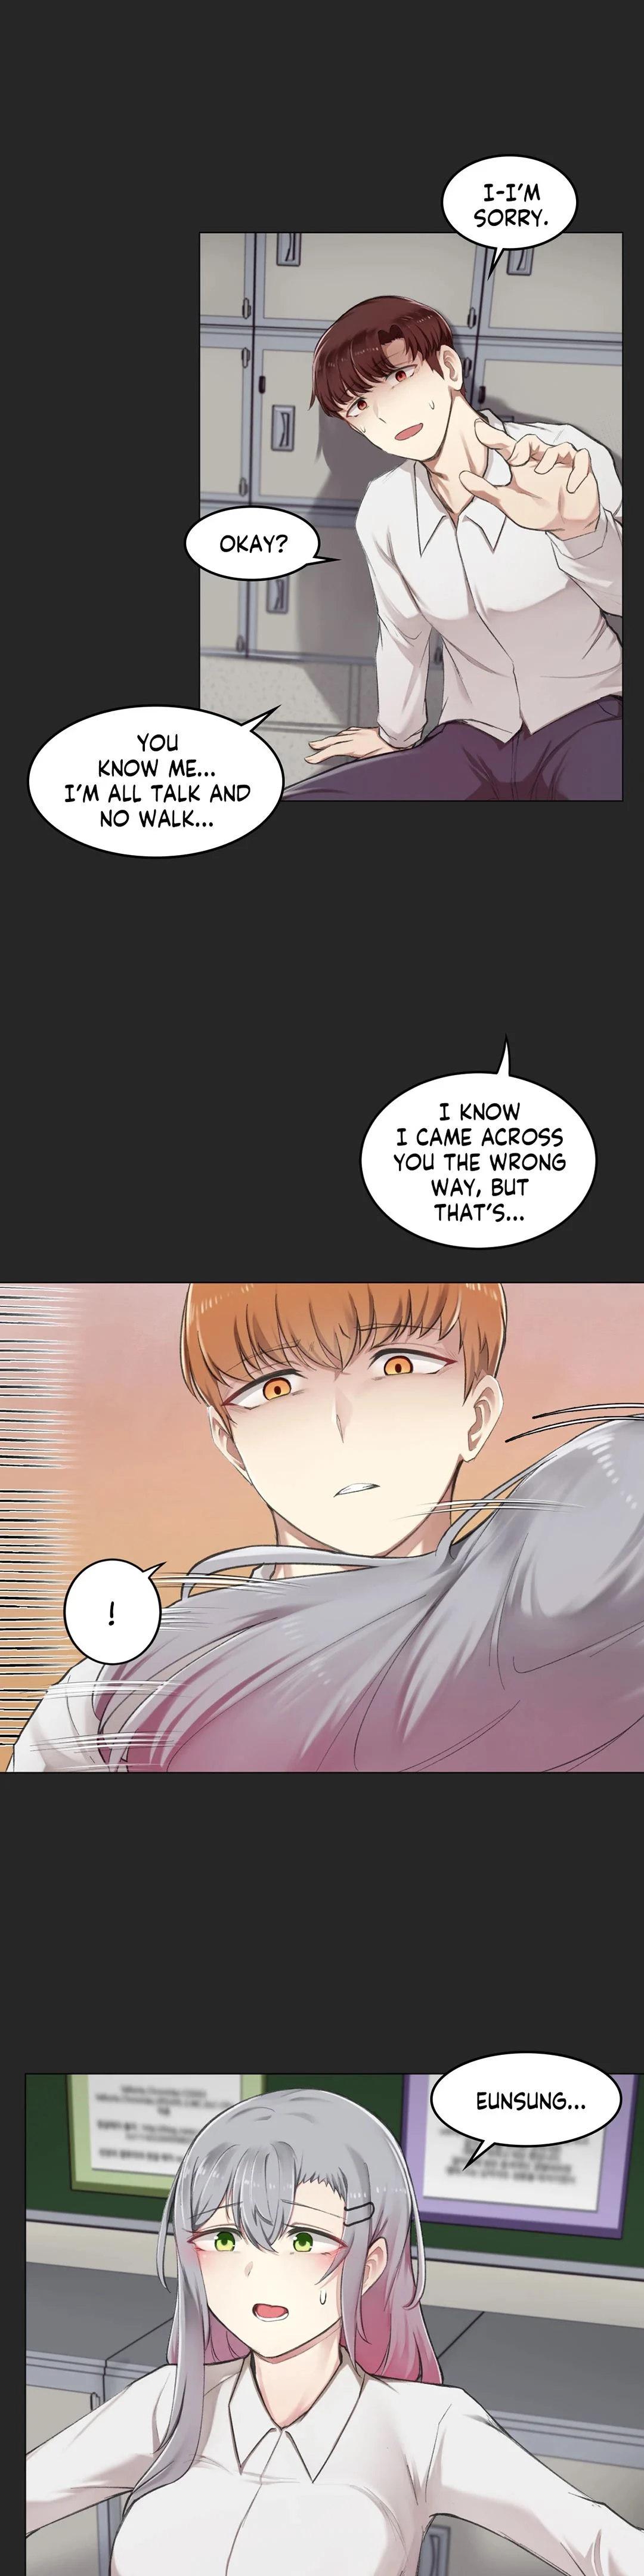 [Dumangoon, KONG_] Sexcape Room: Snap Off Ch.7/7 [English] [Manhwa PDF] Completed 180